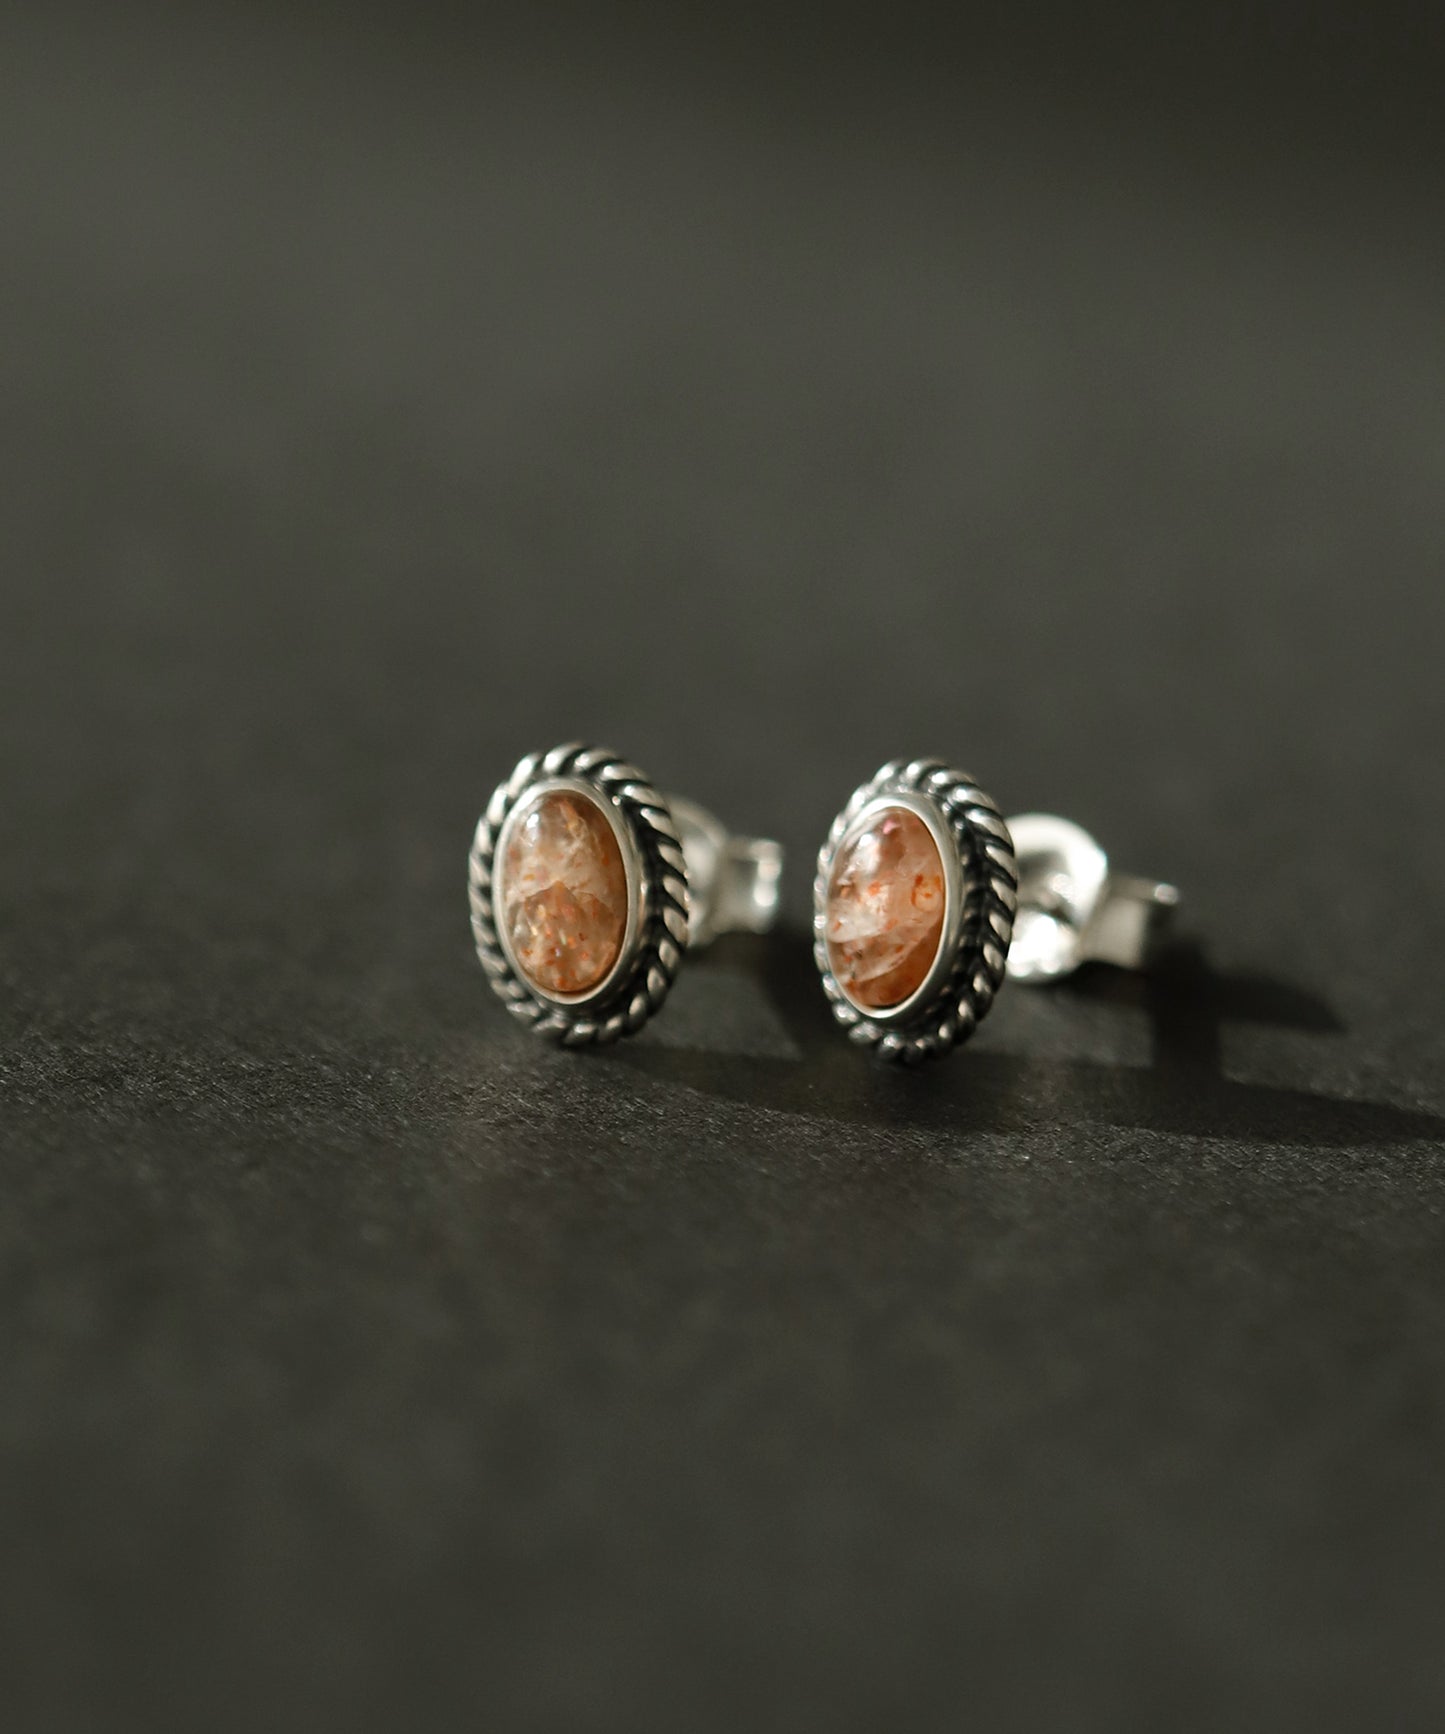 【Eligible for Novelty】Vintage Earrings [925 silver][I]